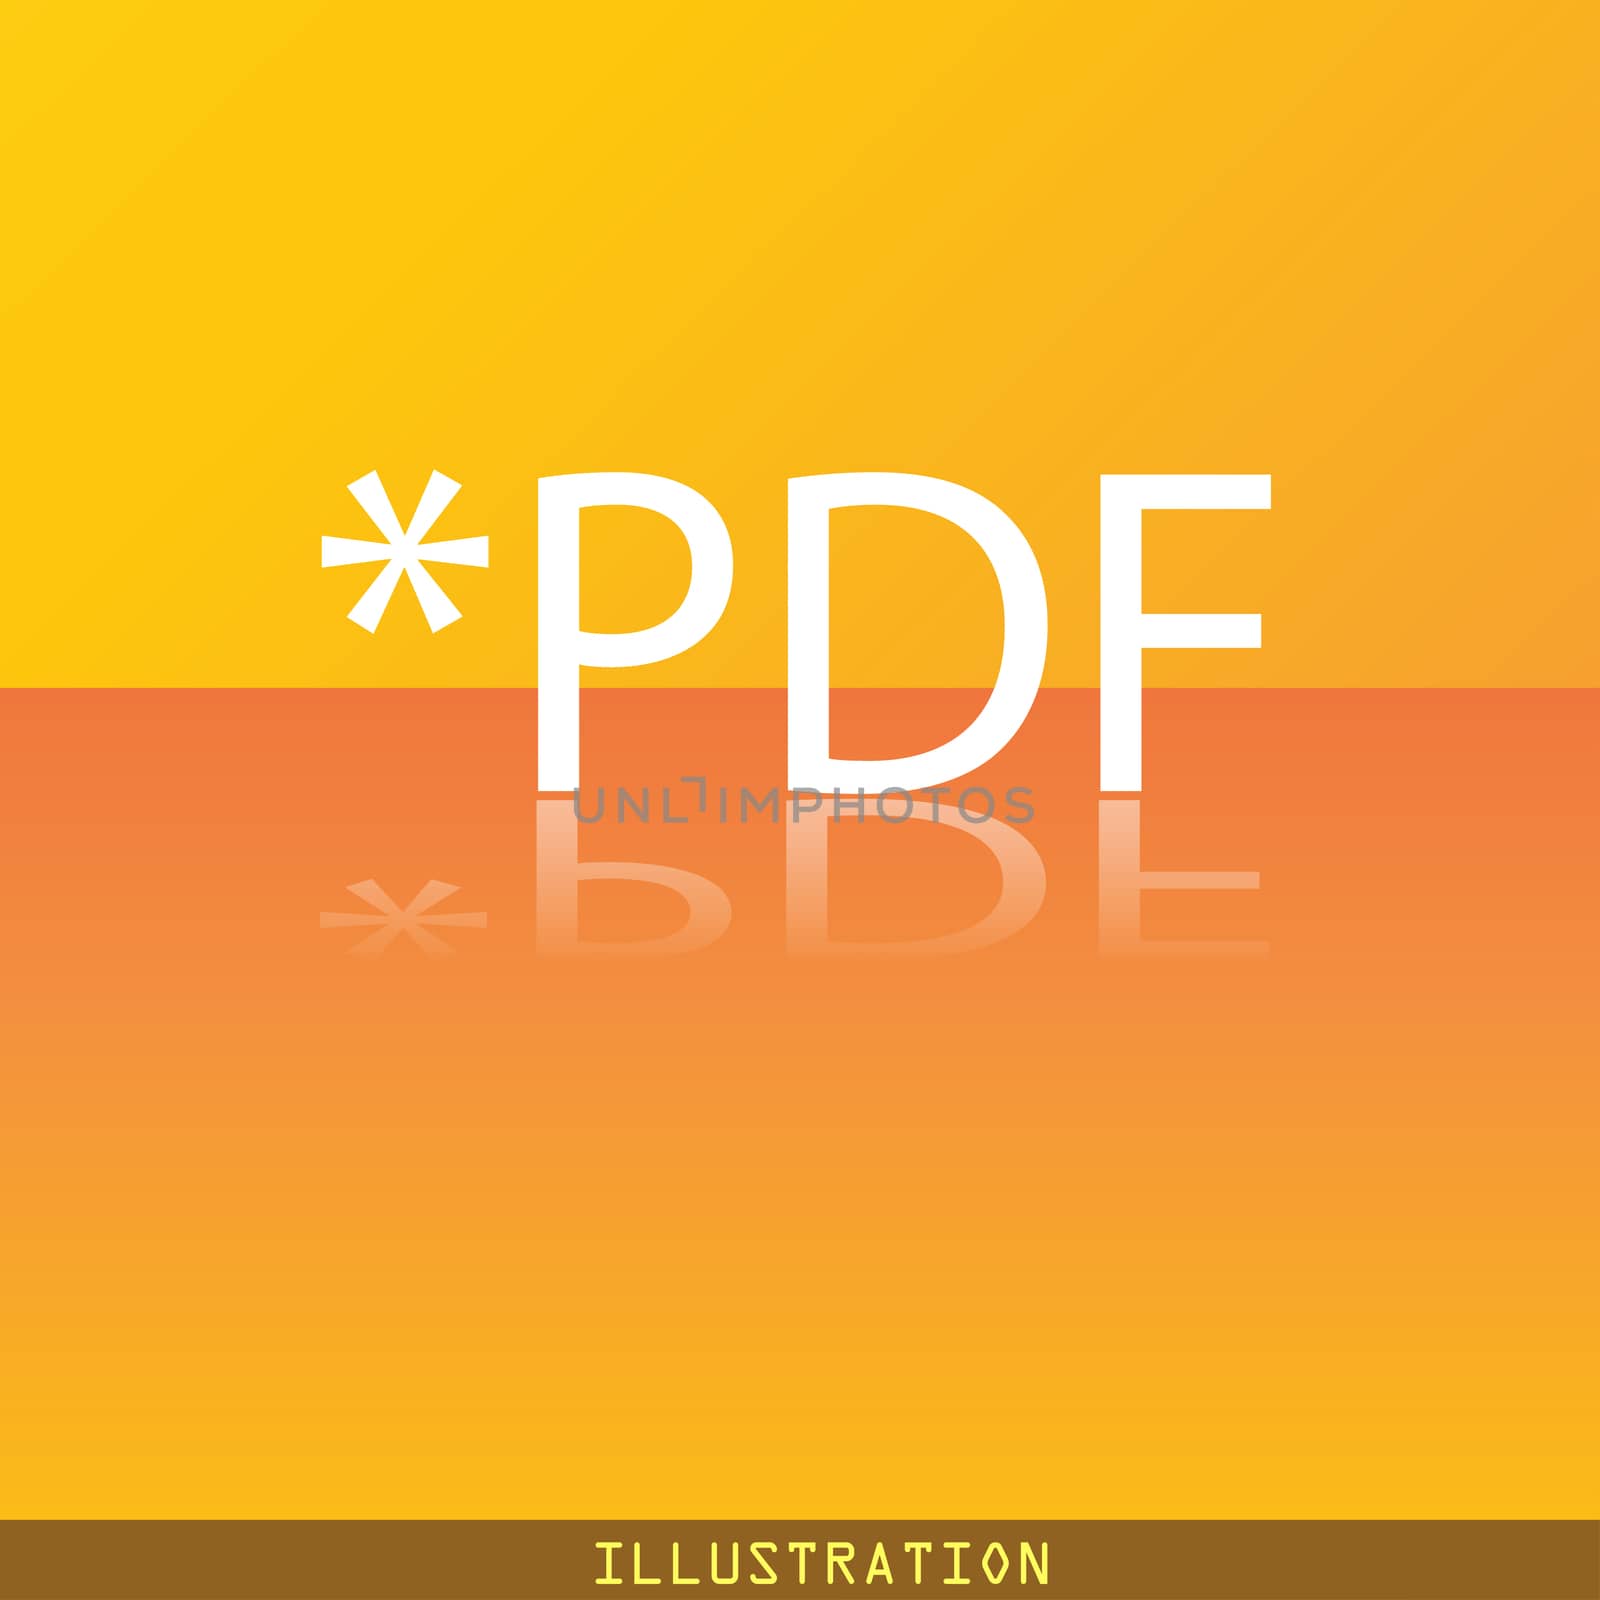 PDF file extension icon symbol Flat modern web design with reflection and space for your text. illustration. Raster version